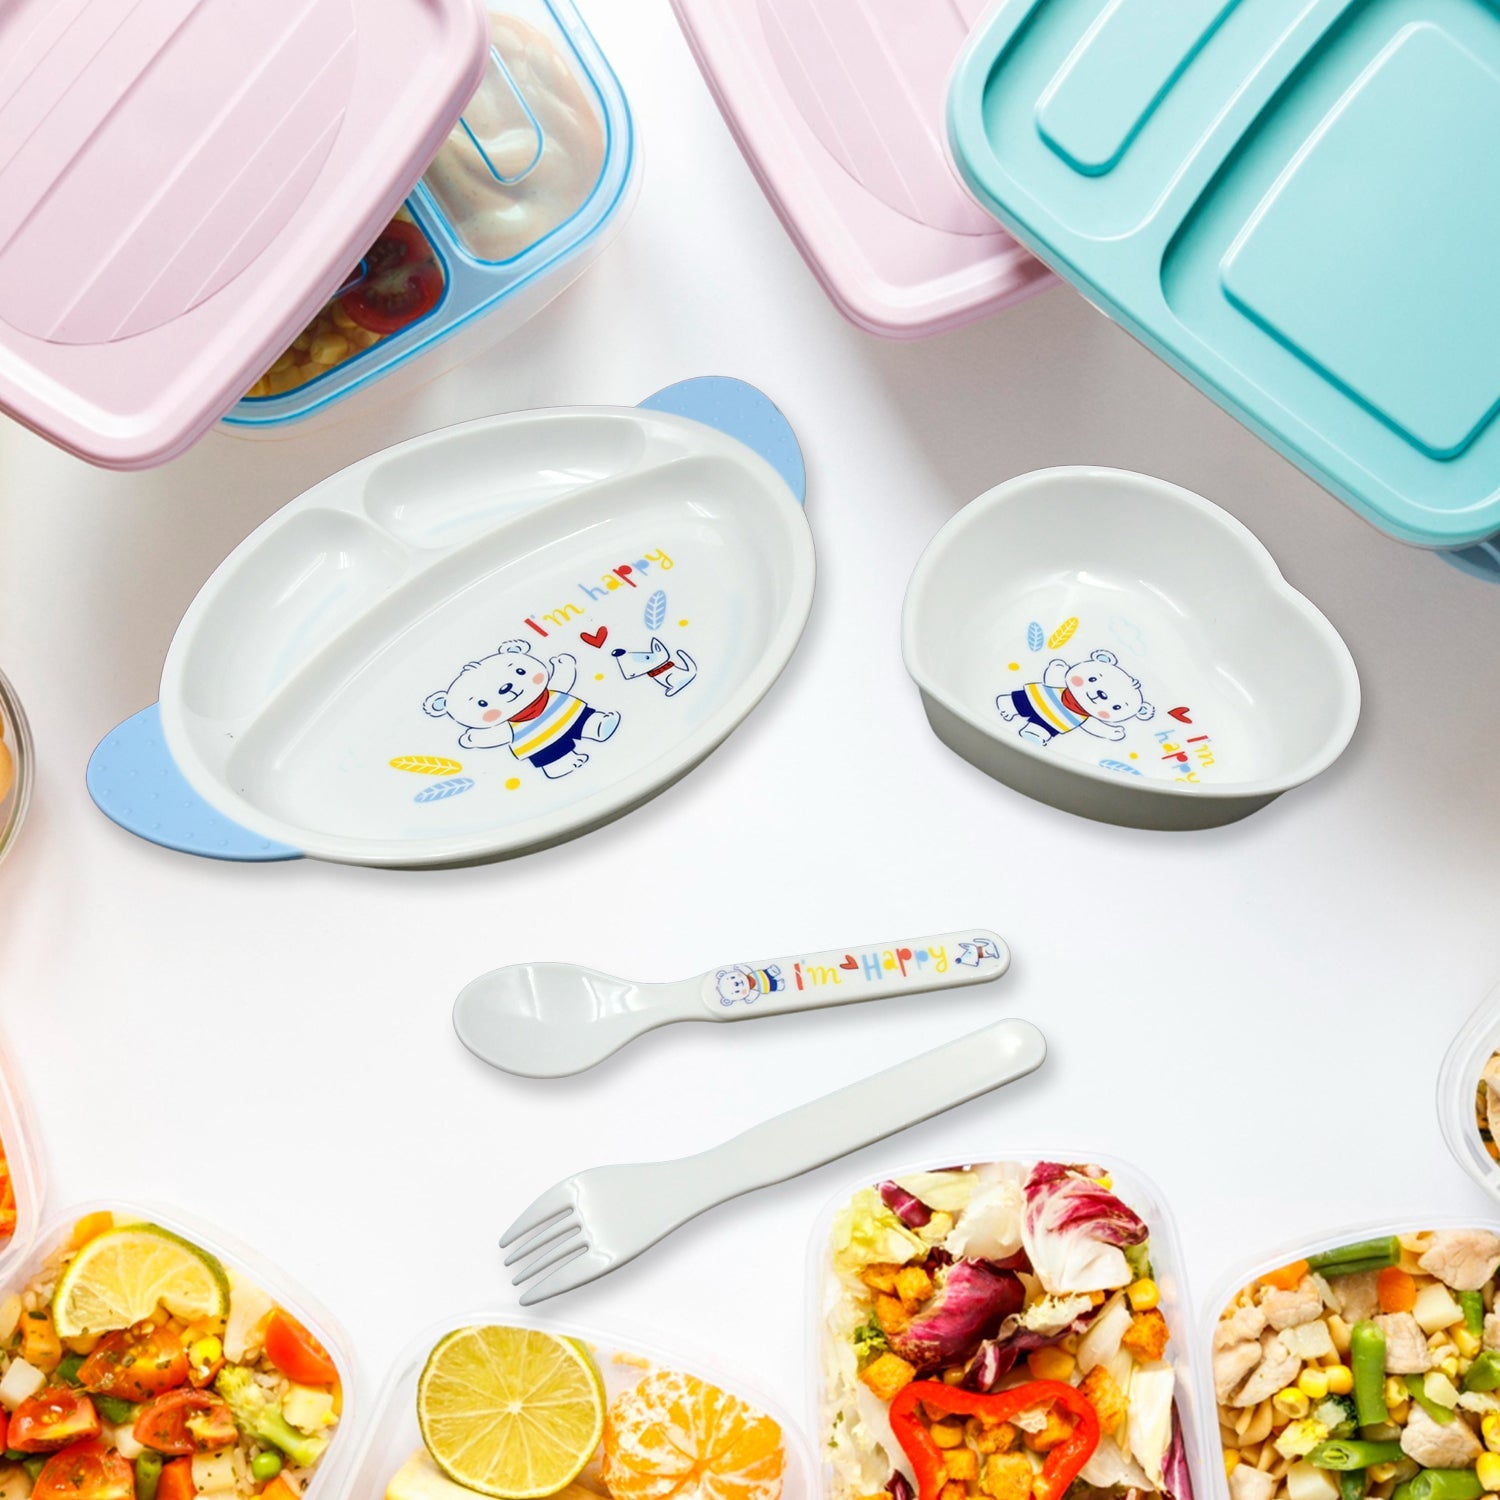 8176 5in1 Baby Feeding Set for Kids and Toddlers,Children Children Dinnerware Set - Feeding Set for Kids, Cartoon Design Plate, Cup, Spoon, Fork  Tableware Cutlery for Kids Microwave & Dishwasher Safe (5 Pcs Set)